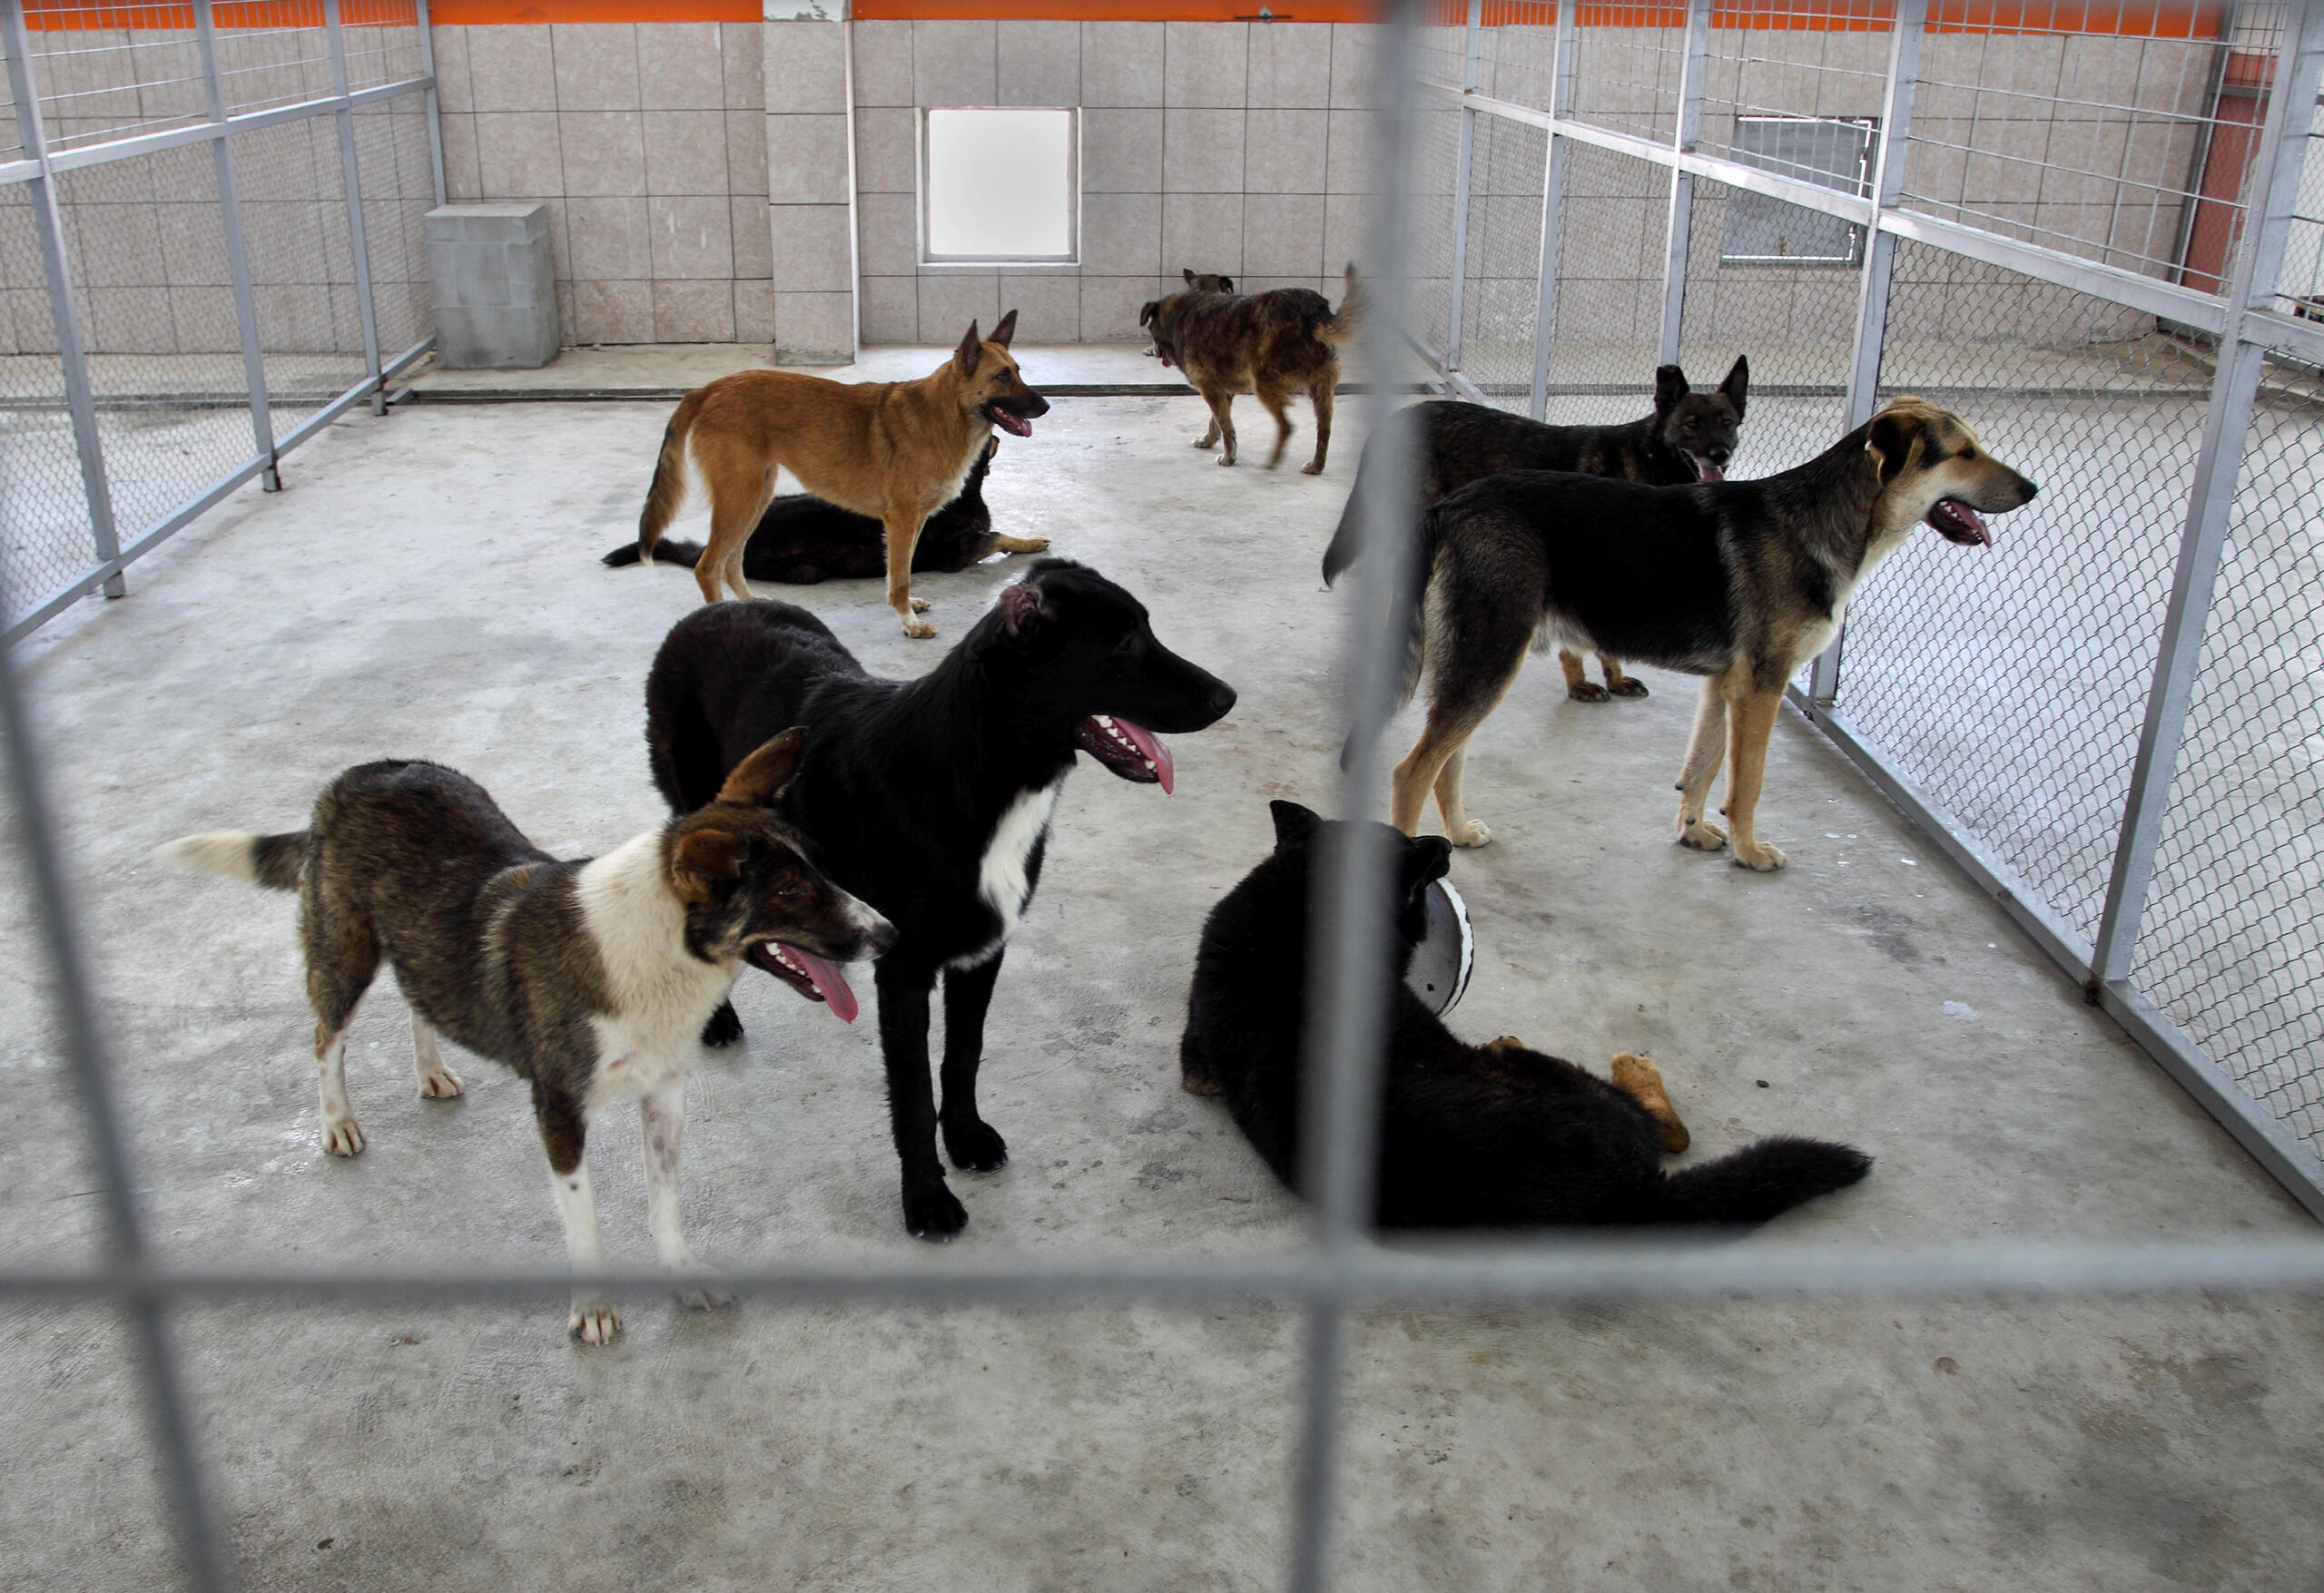 The Vancouver City Council is voting on several changes to rules for dog kennels and shelters in the area, specifically allowing inclusion of dog day care activities, establishing a maximum cap of 175 dogs and prohibiting breeding.